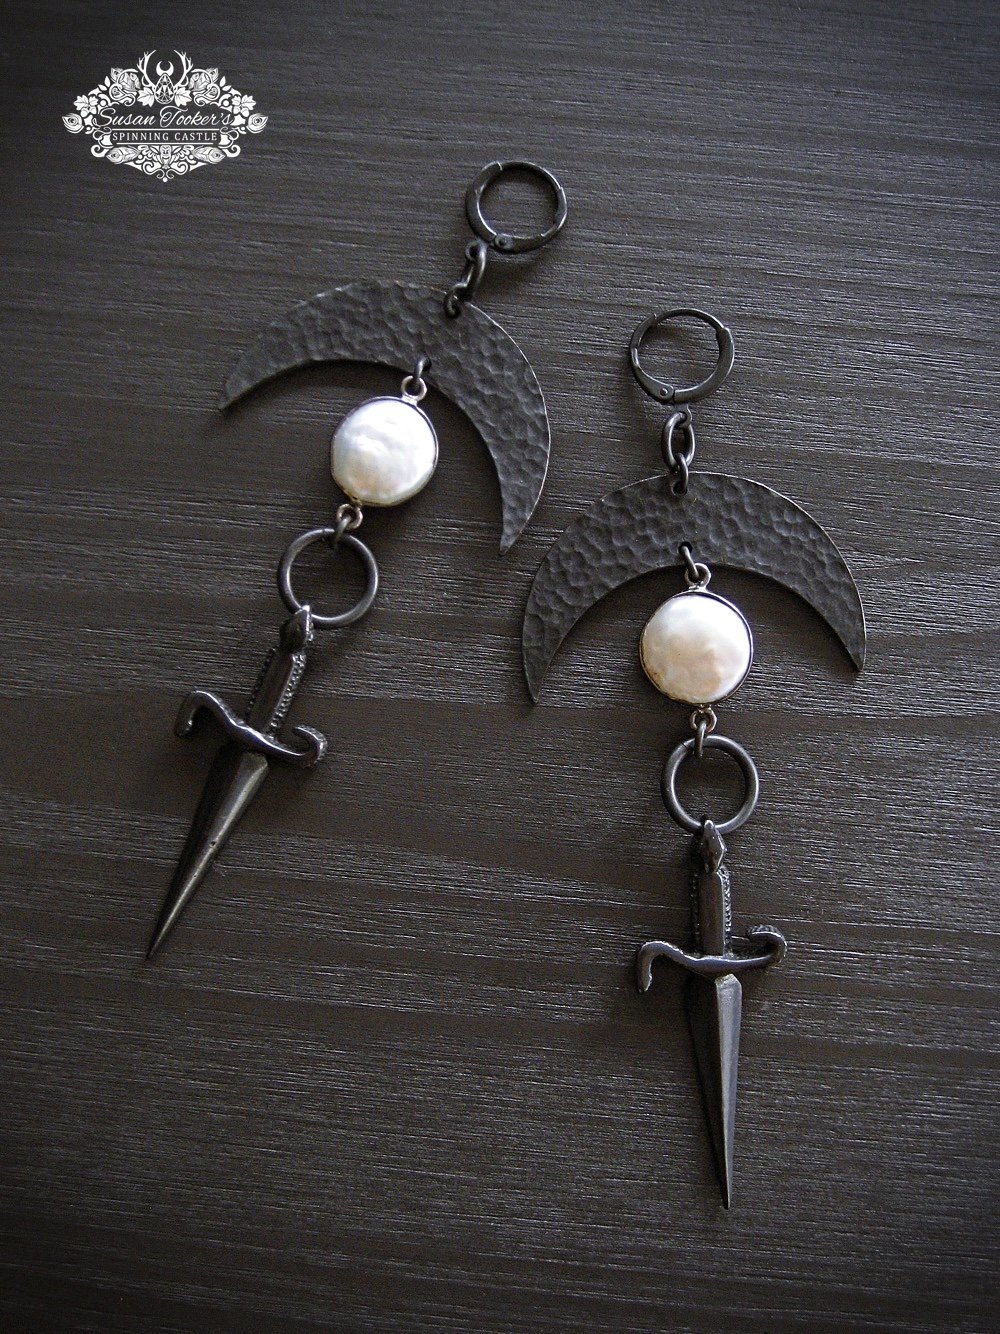 Image of ATHAME - Crescent Moon Sword Dagger Freshwater Pearl Drop Earrings Boho Witch Dark Dangle